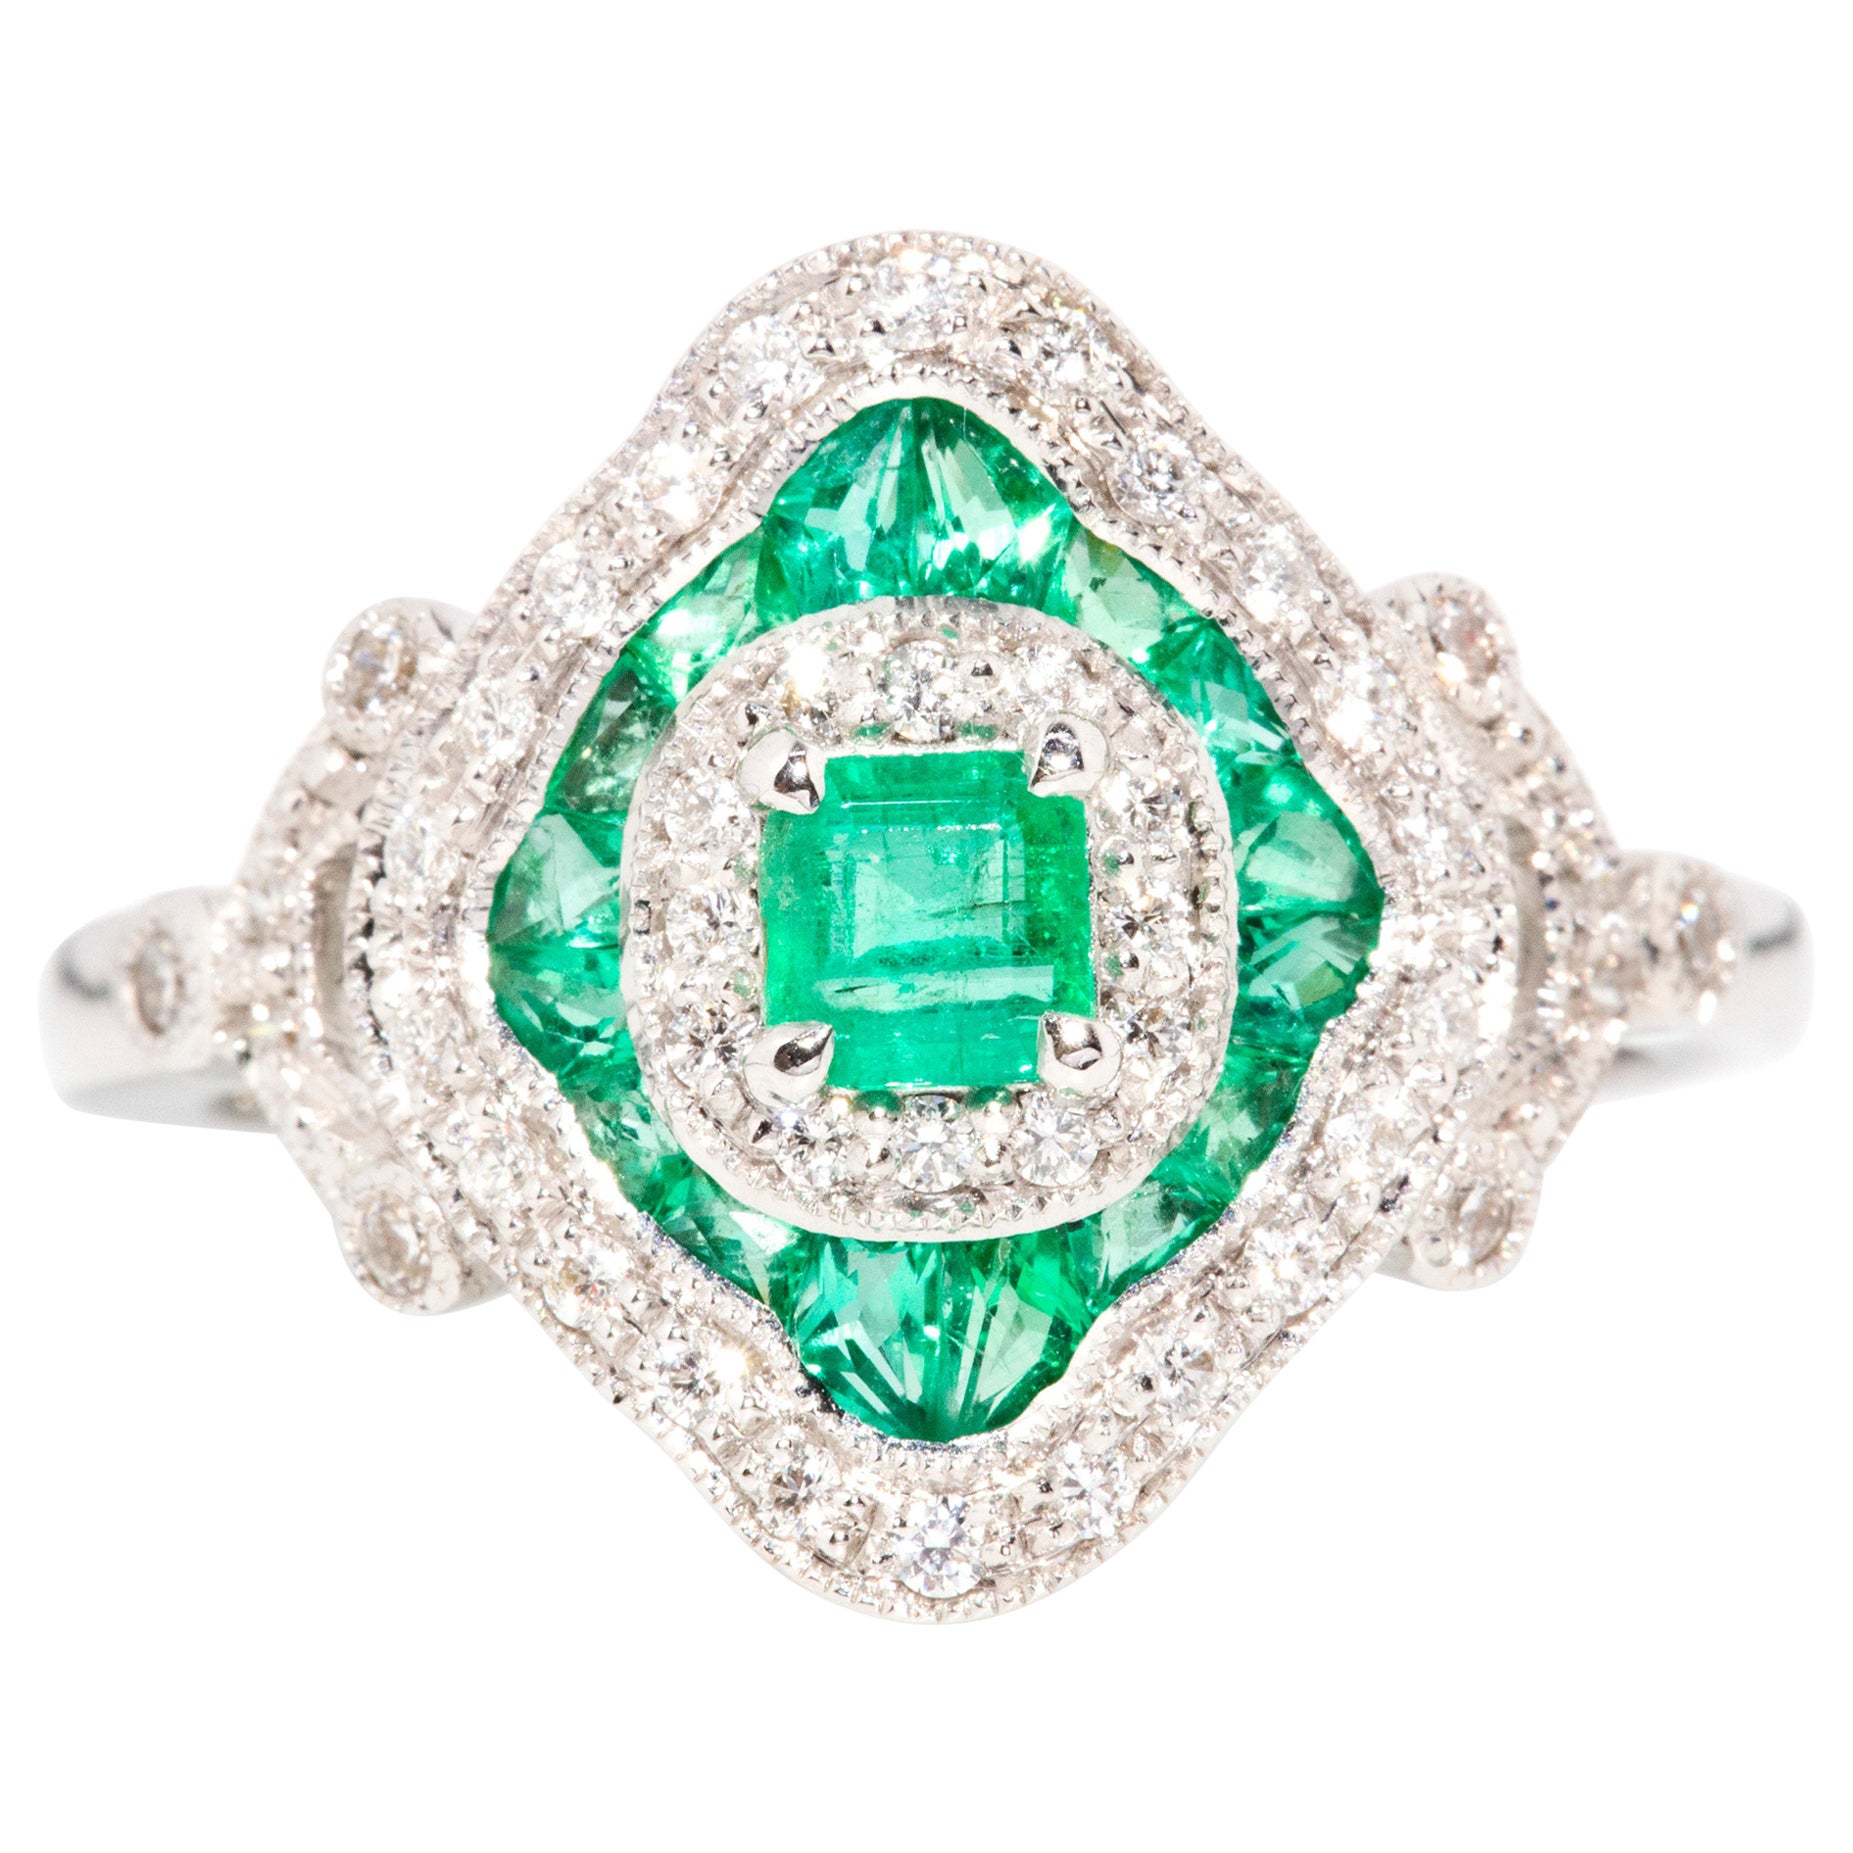 Contemporary Emerald & Diamond Art Deco-Inspired 18 Carat White Gold Ring For Sale